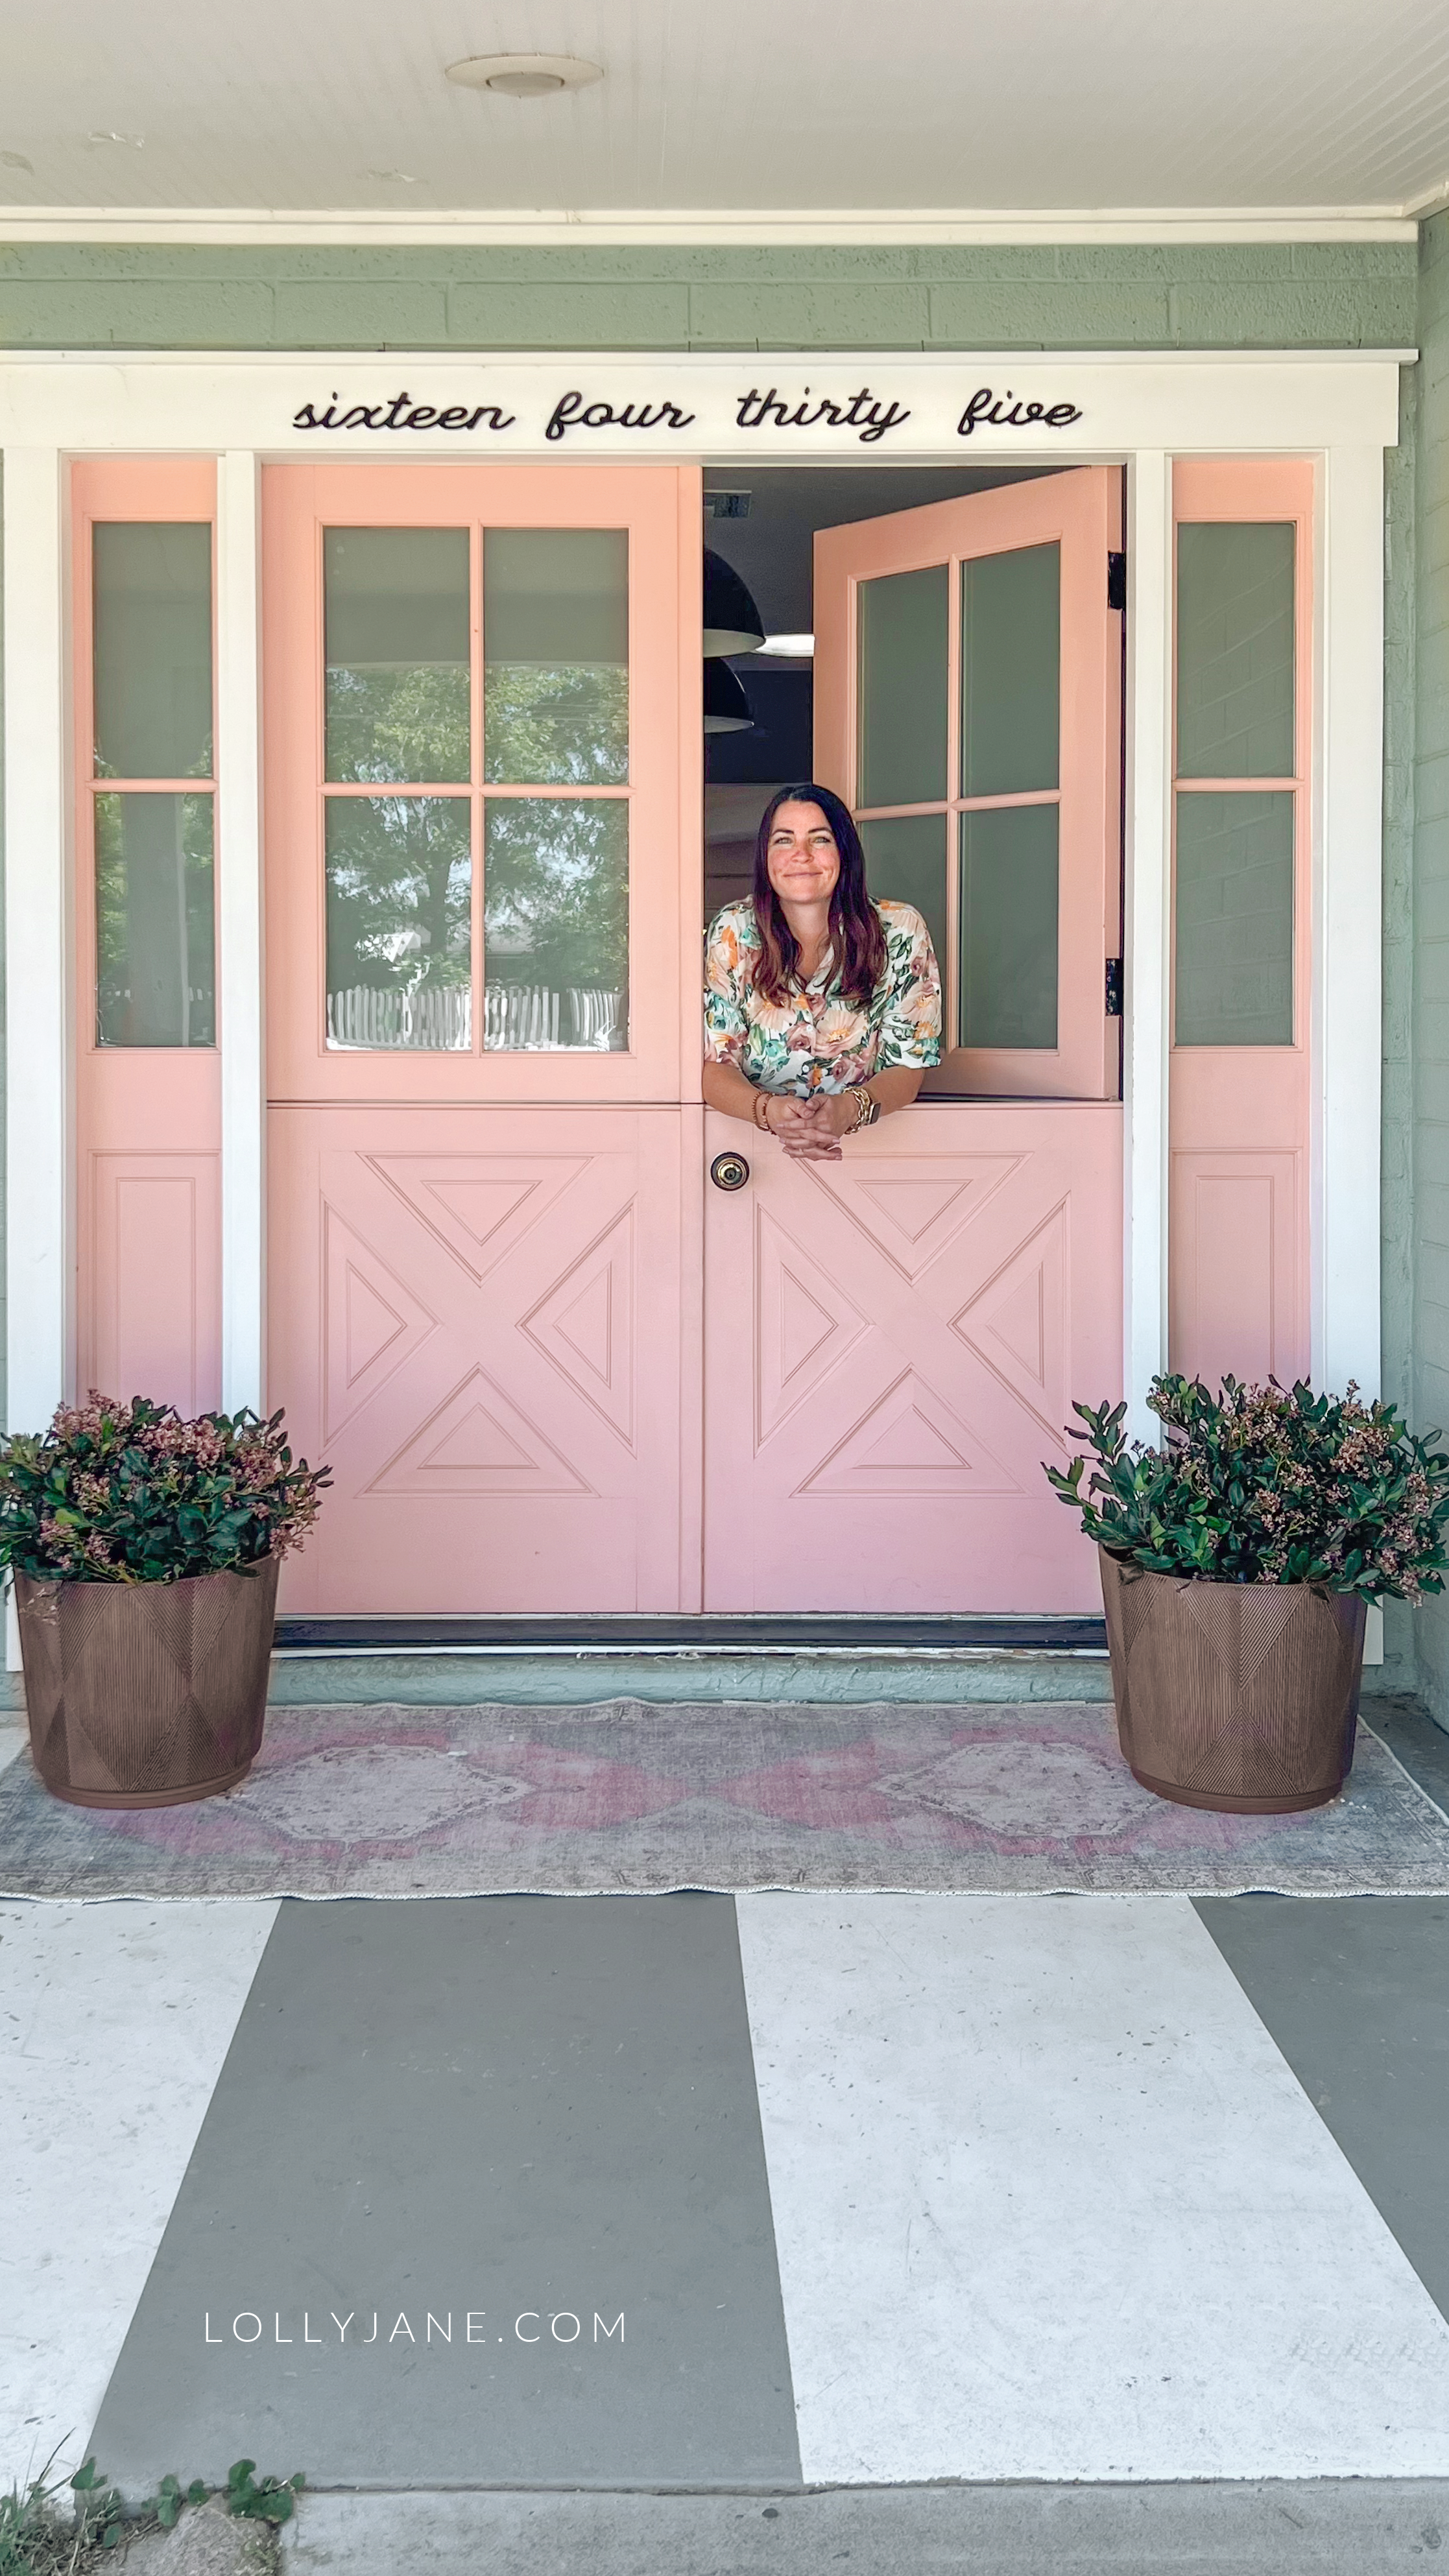 How to decorate your porch with Walmart's latest planters and bushes! Check out these gorgeous Hudson large front porch planters, just plop in your favorite plant for instant decor.